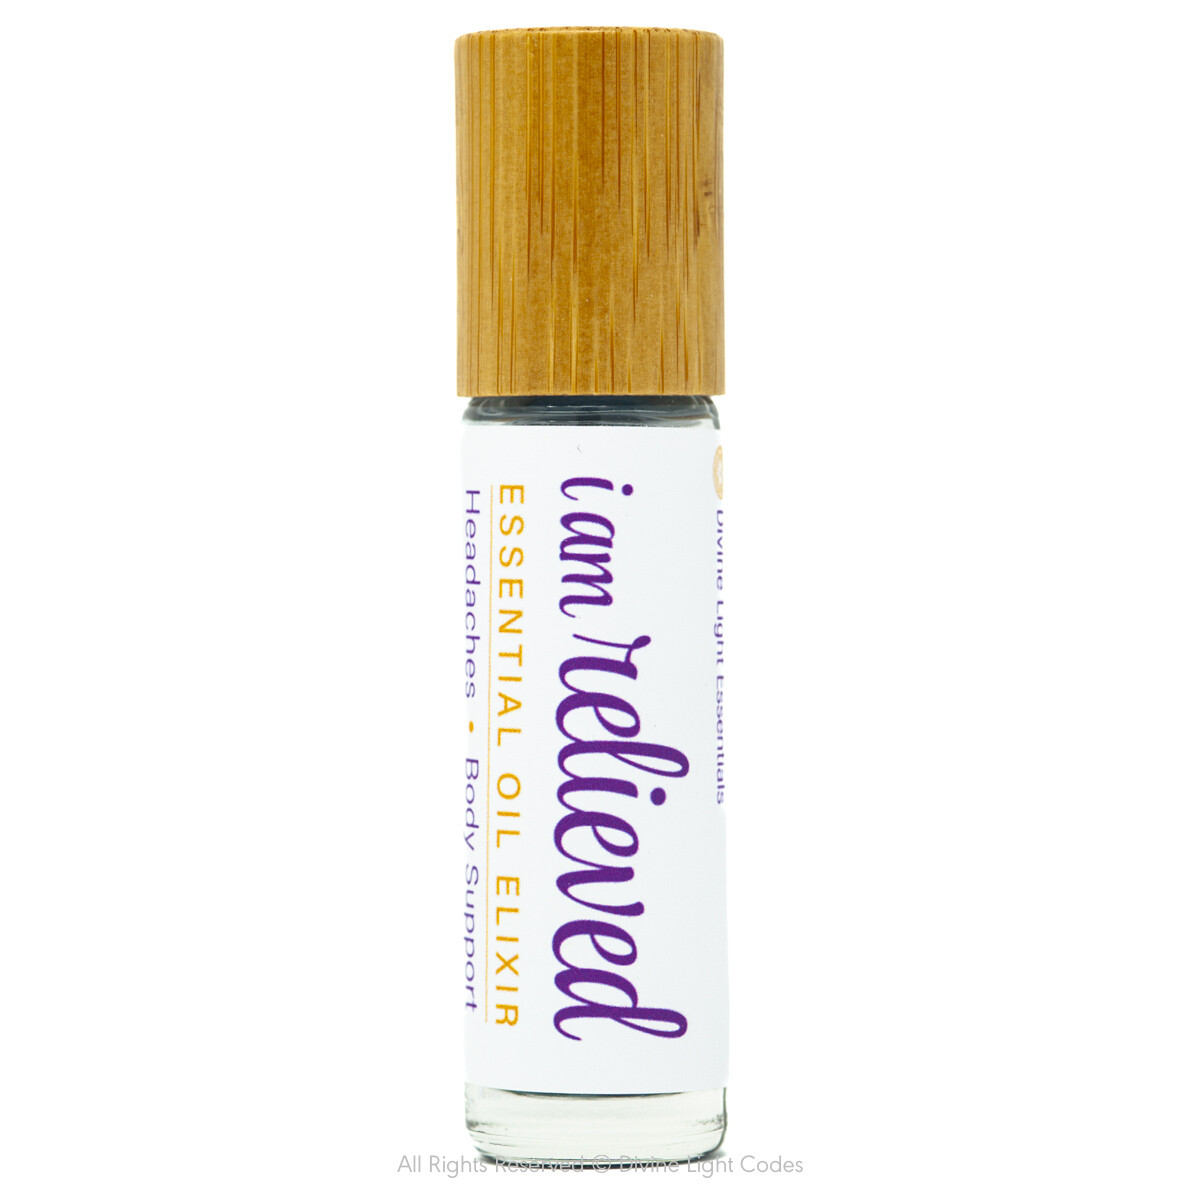 I am Relieved Essential Oil Elixir